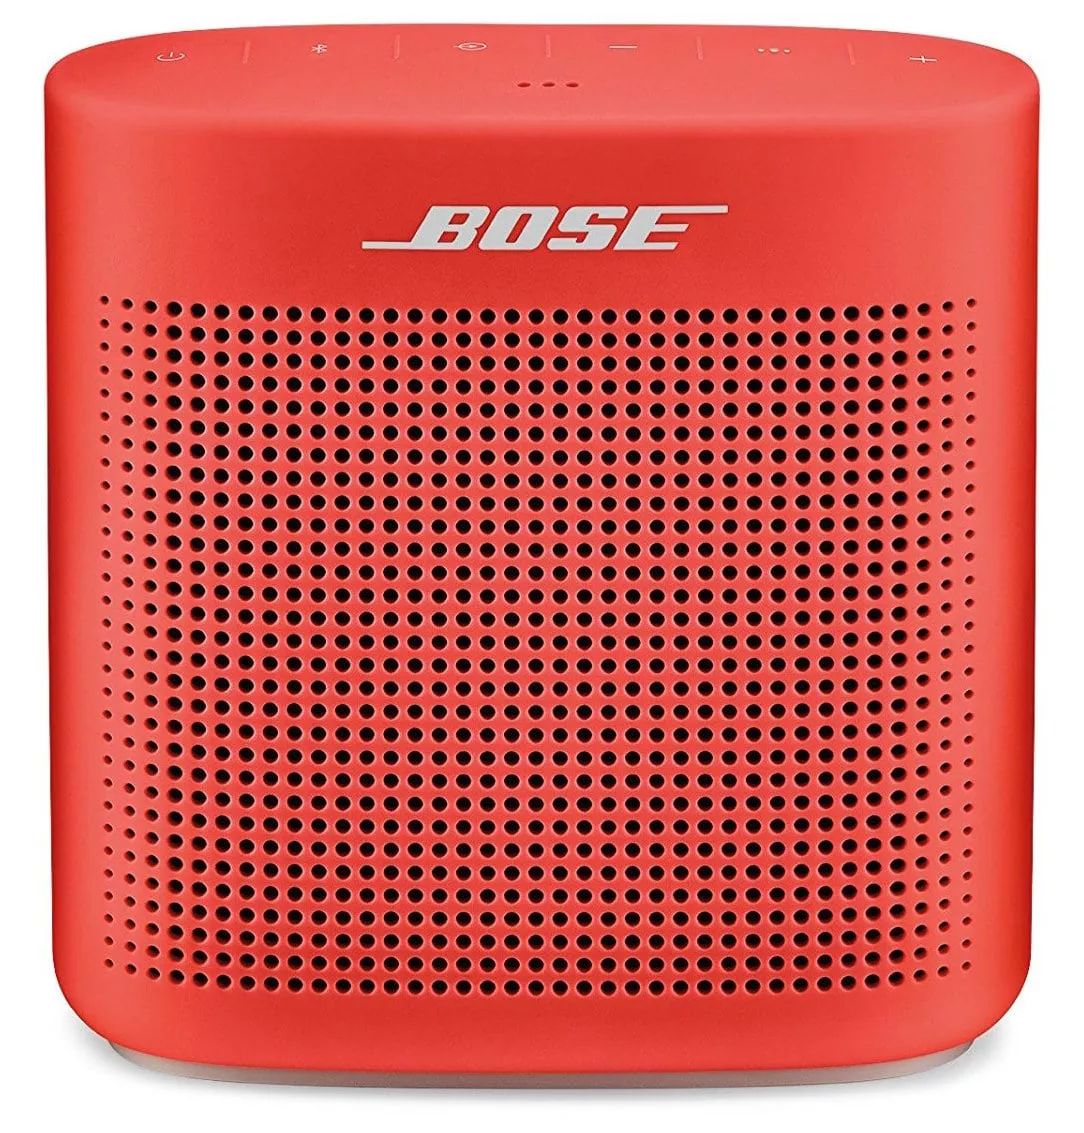 Best Bluetooth Wireless Portable Spakers 2017: Bose in Red